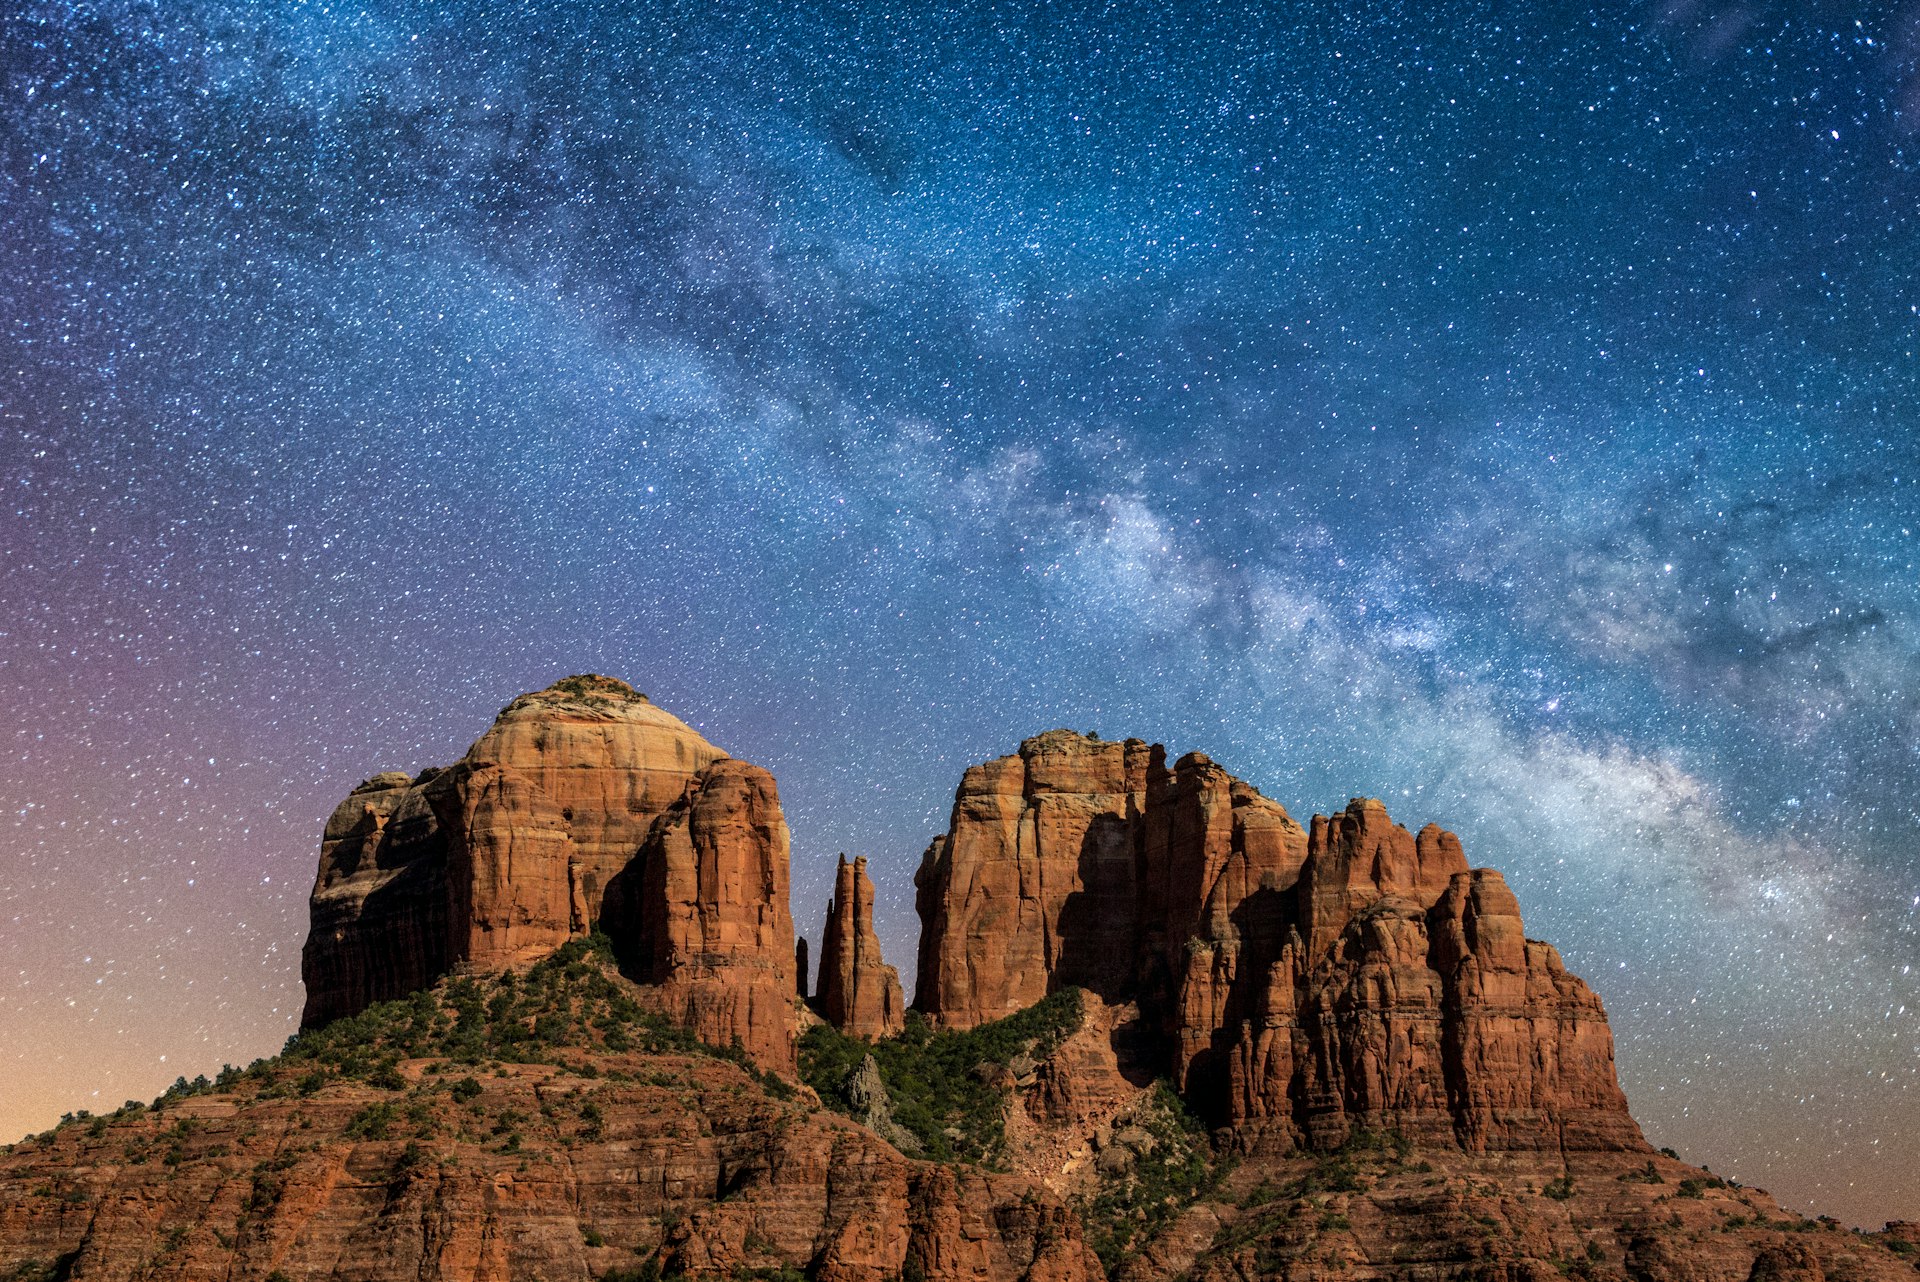 A towering reddish-brown rock formation stands against the night sky, illuminated by the stars of the Milky Way